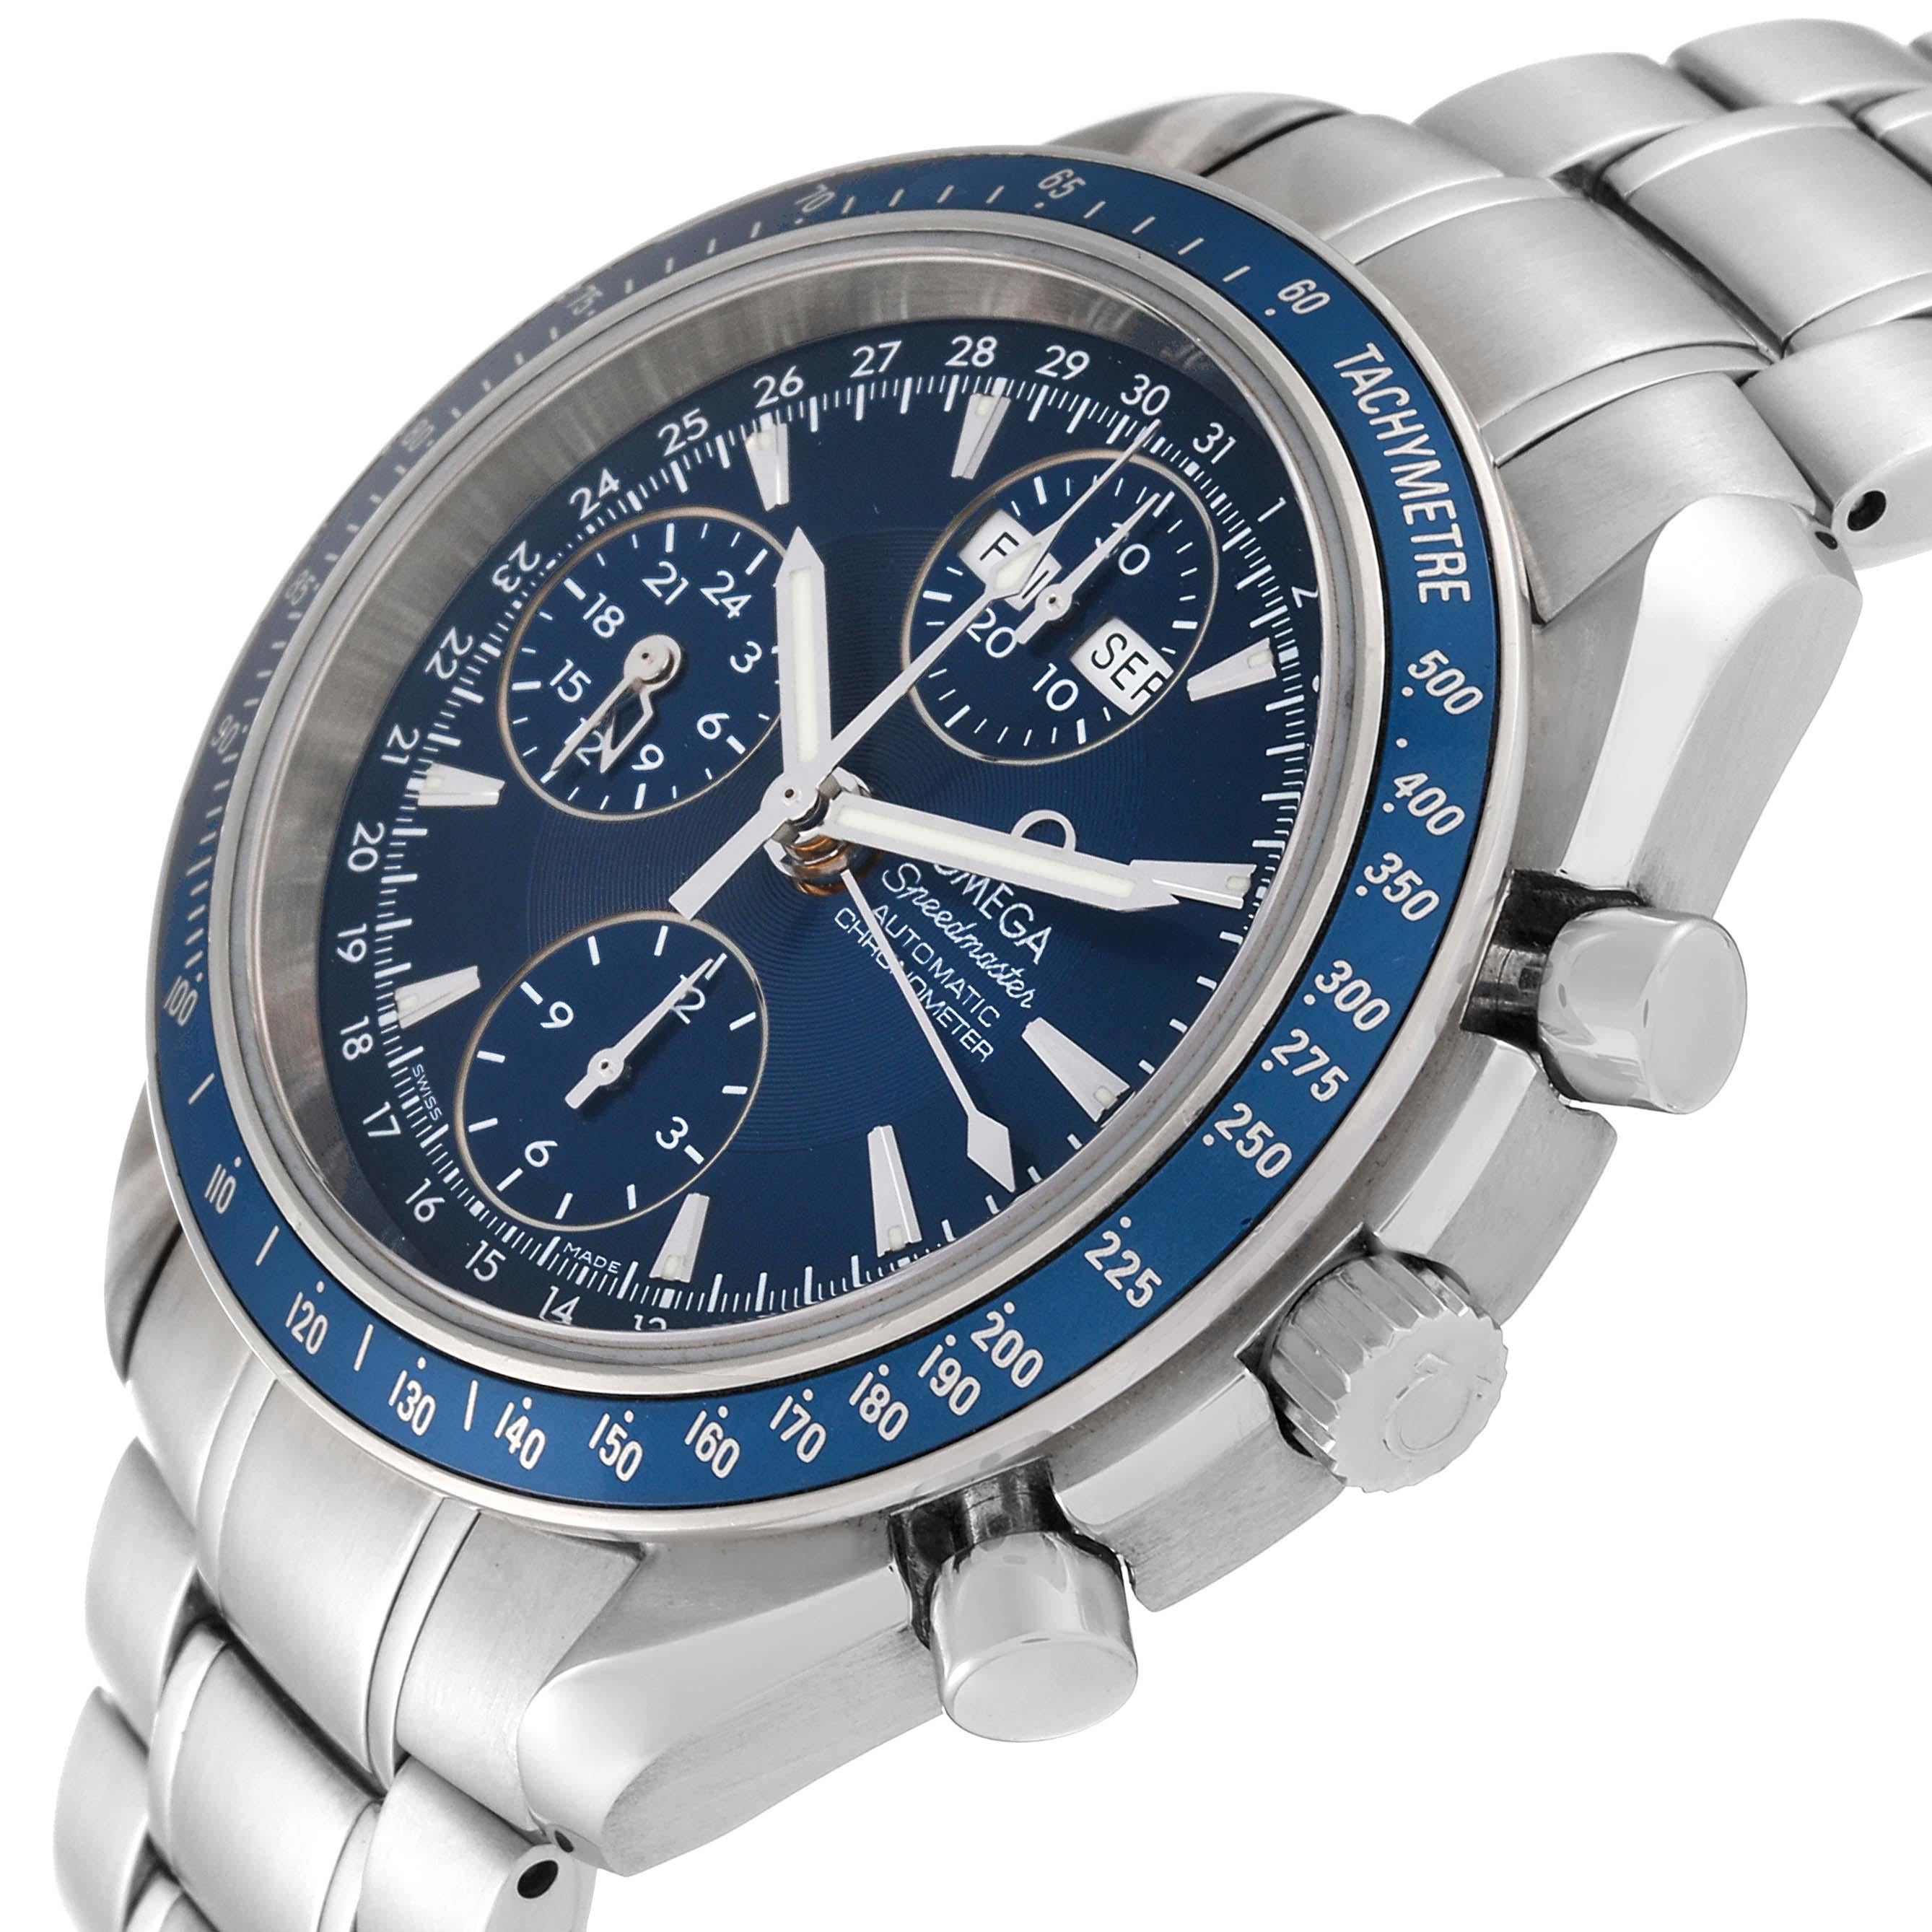 Omega Speedmaster Day Date Blue Dial Chronograph Steel Mens Watch 3222.80.00 Box Card. Automatic self-winding chronograph movement. Day, date, and month indications. Stainless steel round case 39.0 mm in diameter. Blue bezel with tachymeter scale.